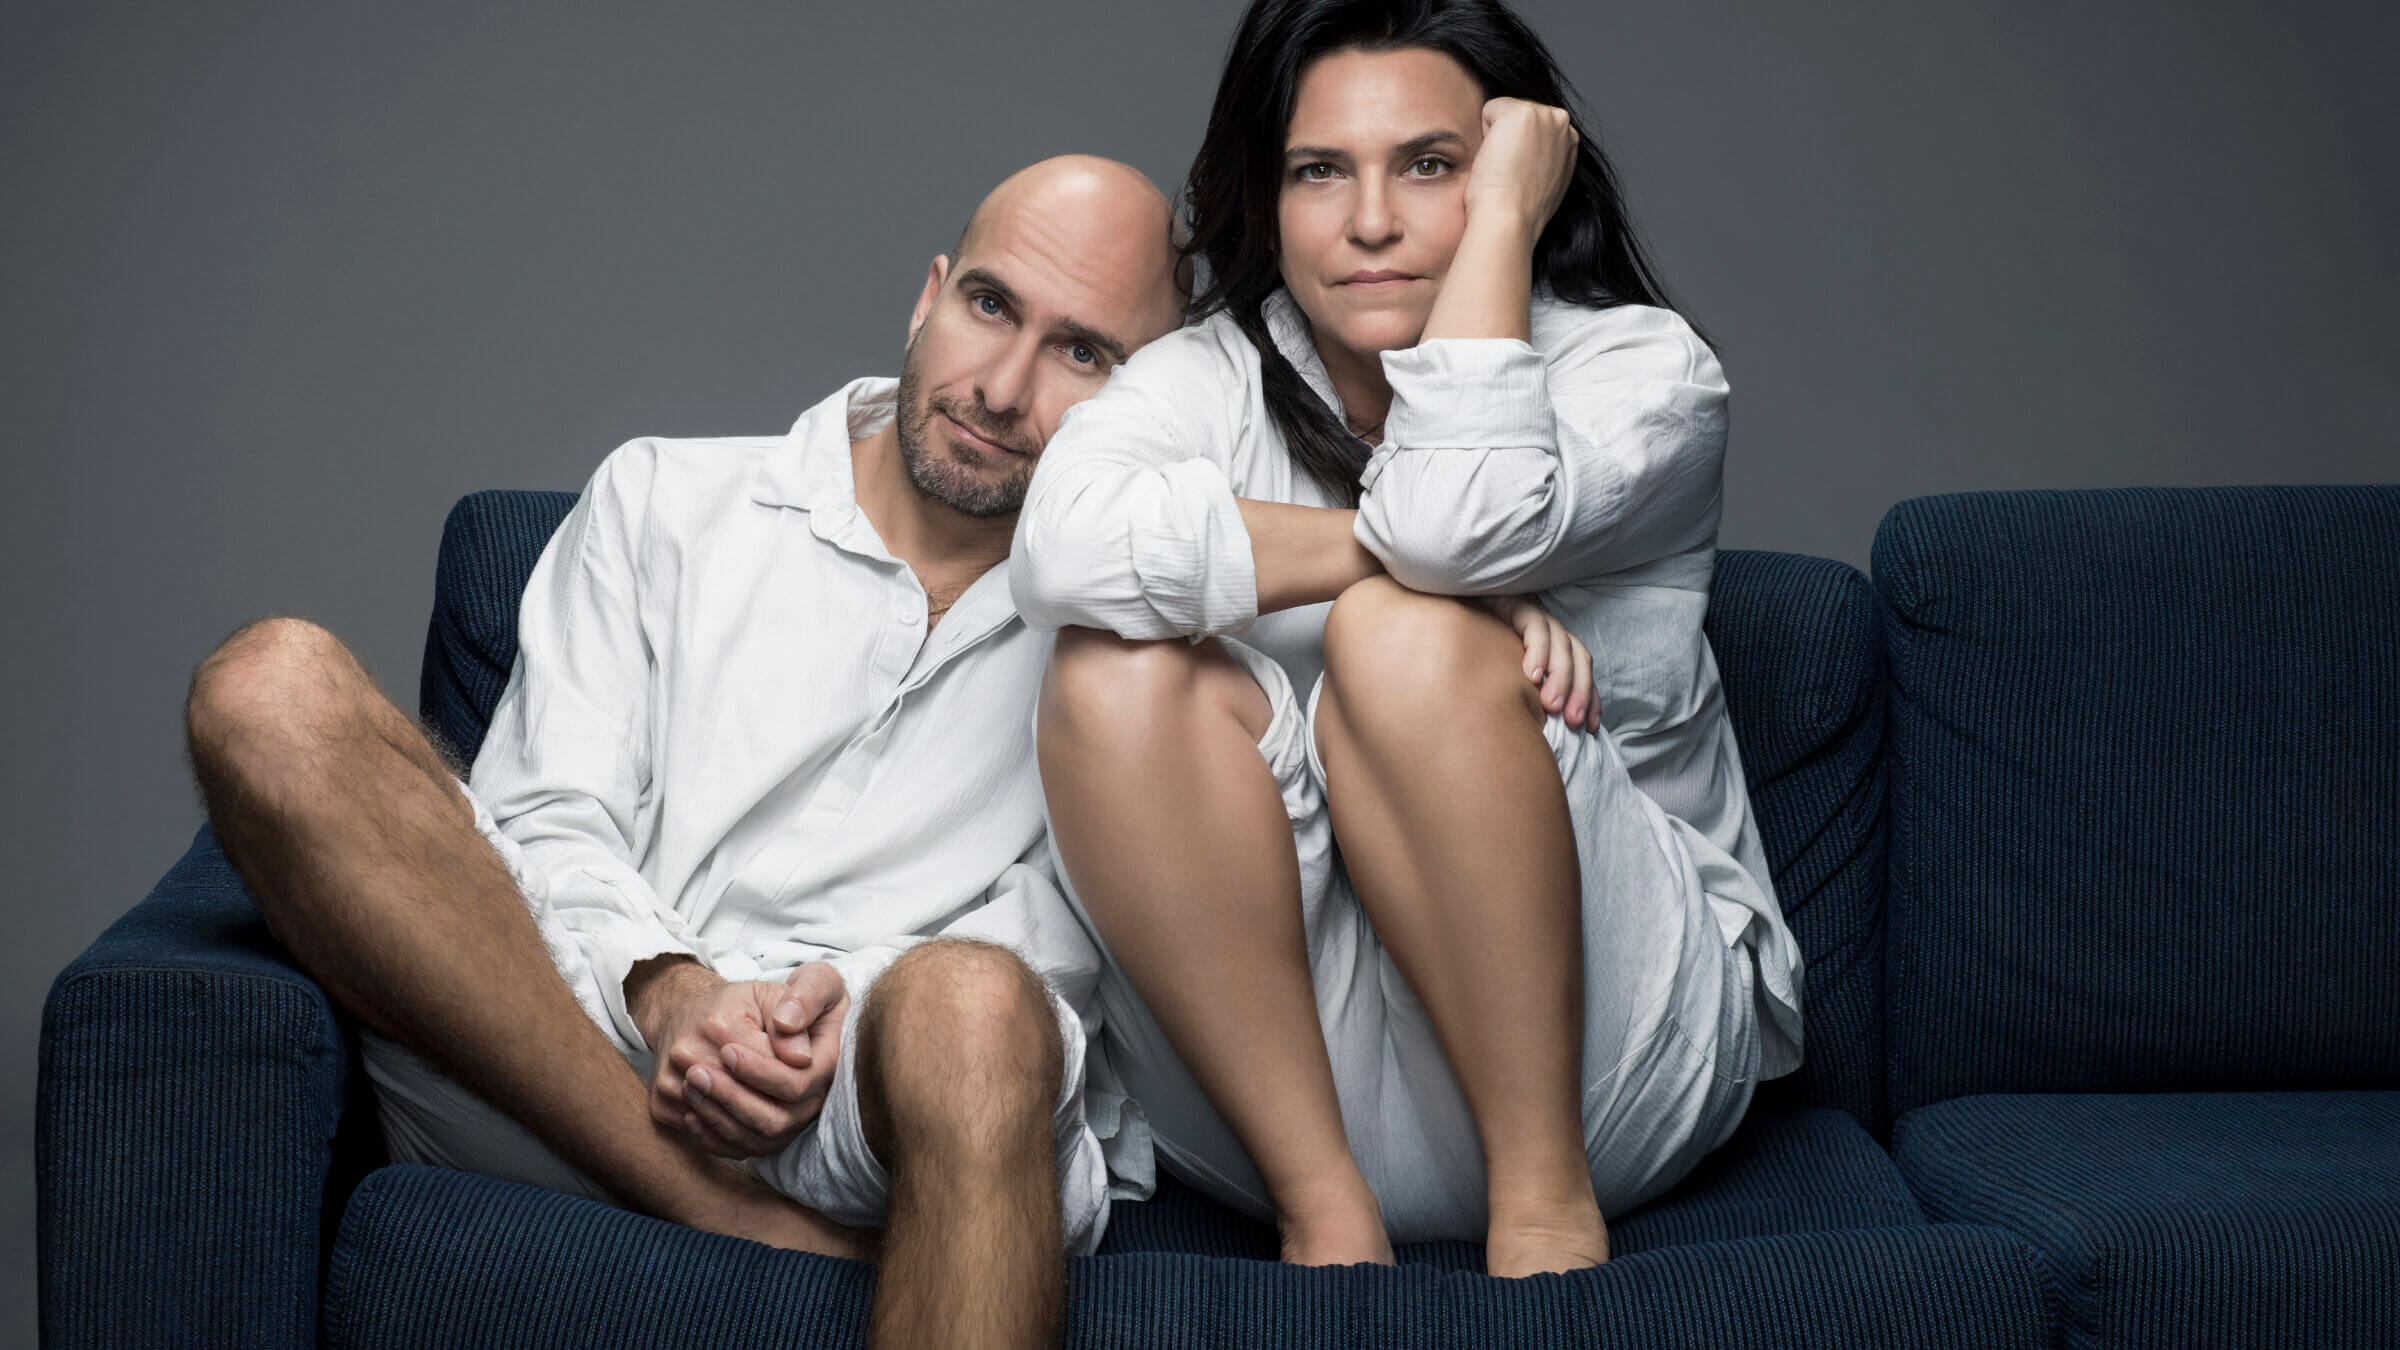 Assi Cohen and Dana Modan play neighbors on Israel's hit comedy series "Significant Other."